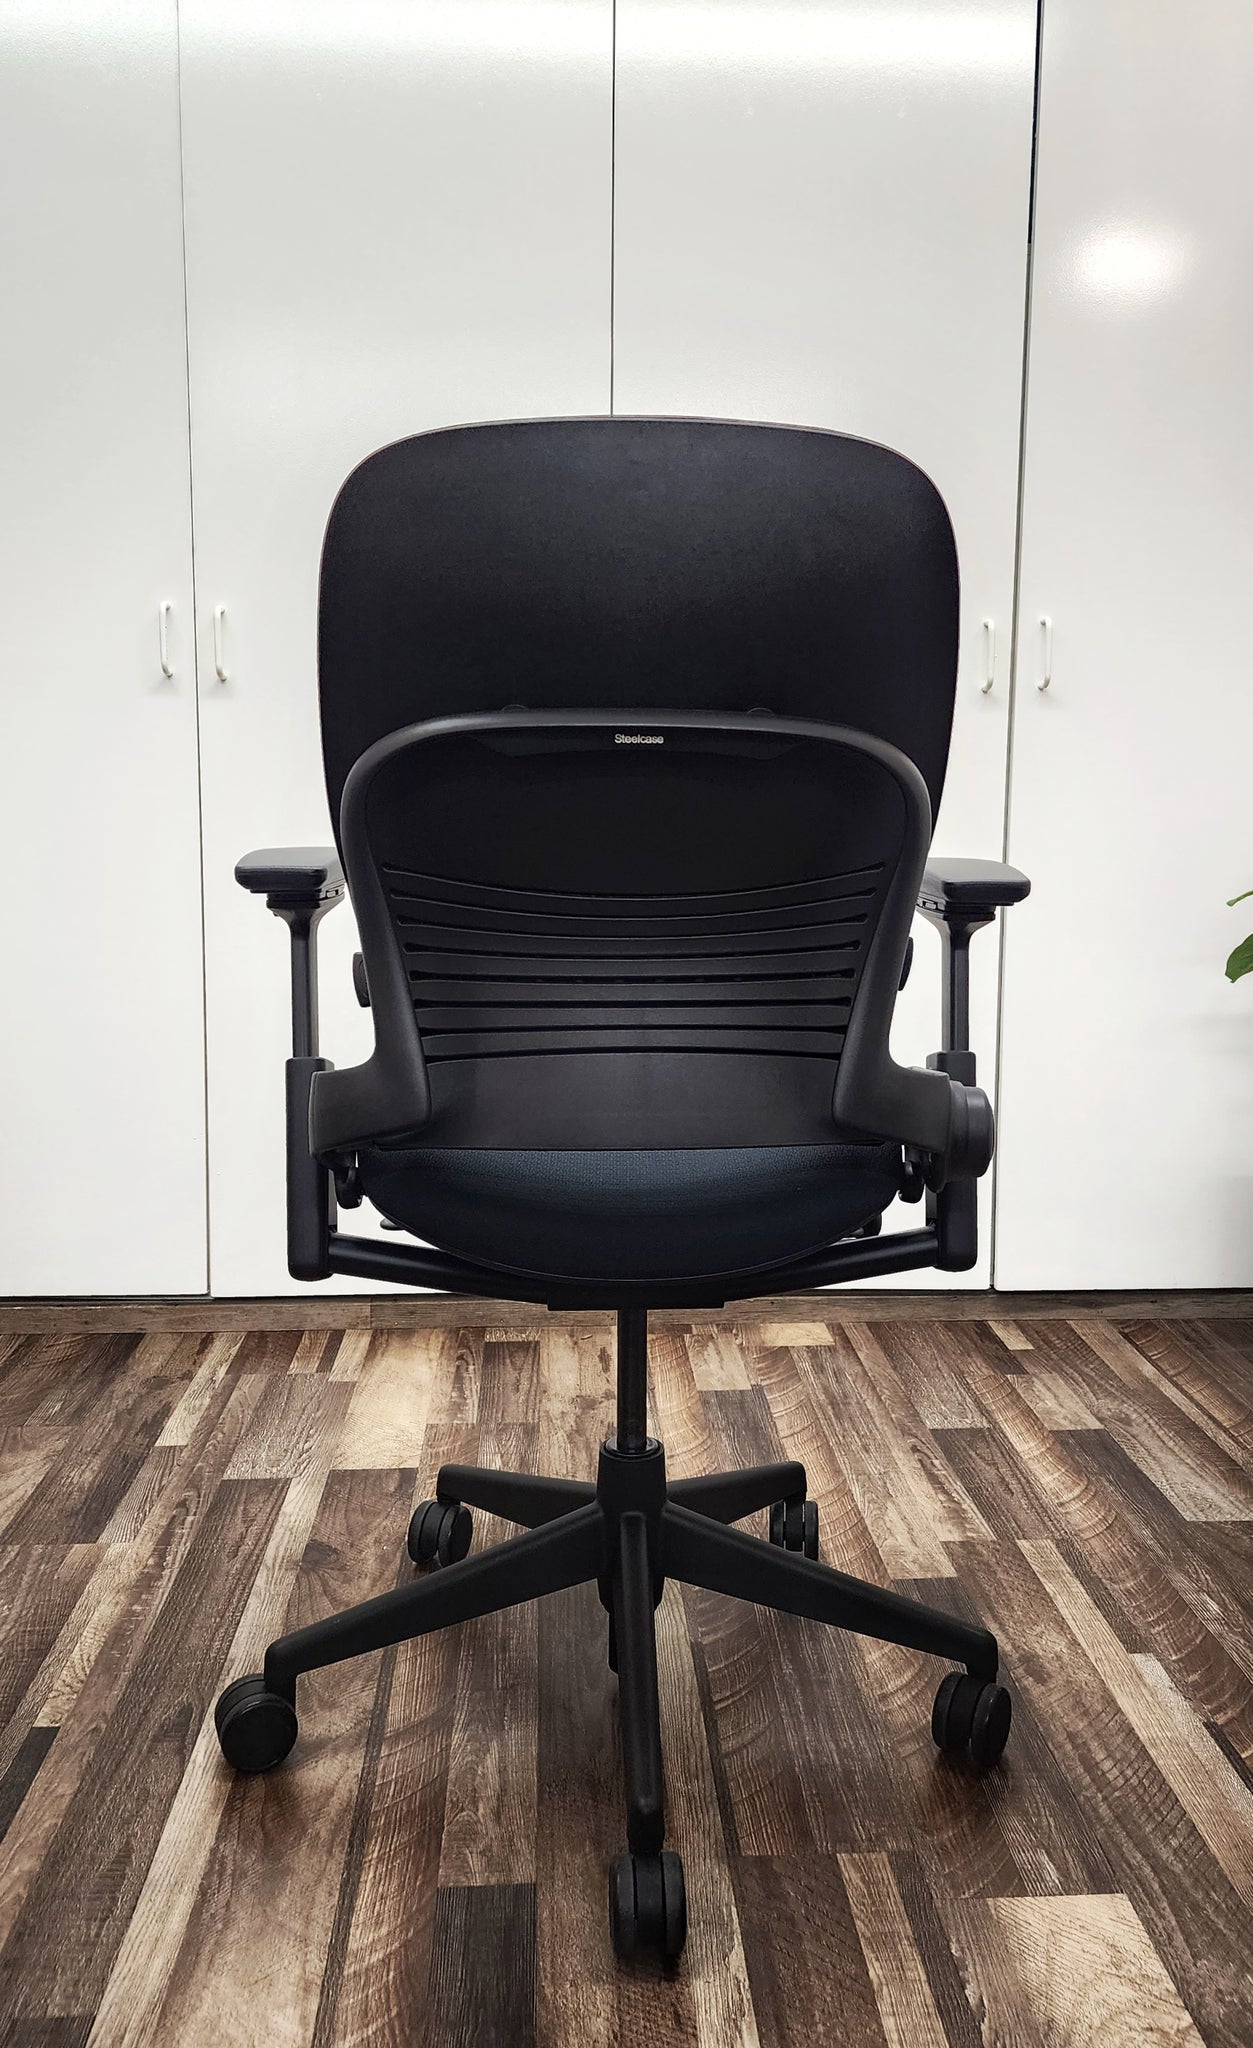 Steelcase Leap V2 Office Chair (Black) – Executive Seating Co.